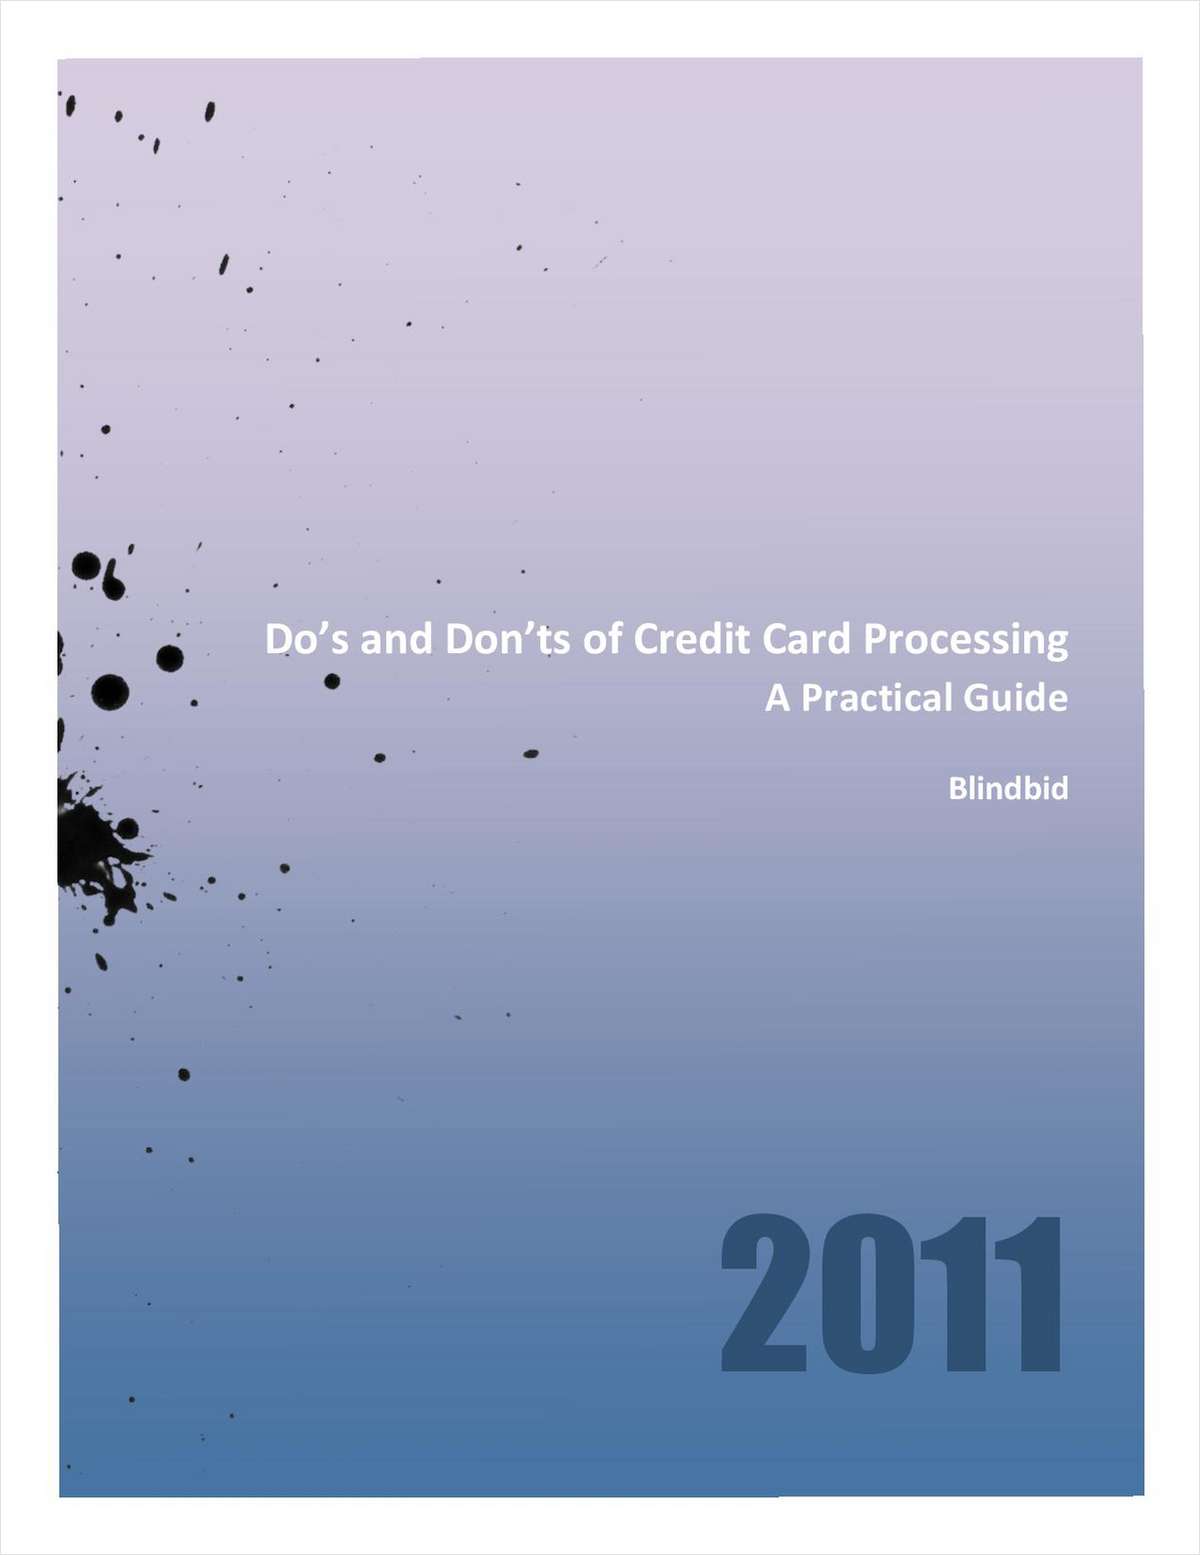 Do's and Don'ts of Credit Card Processing